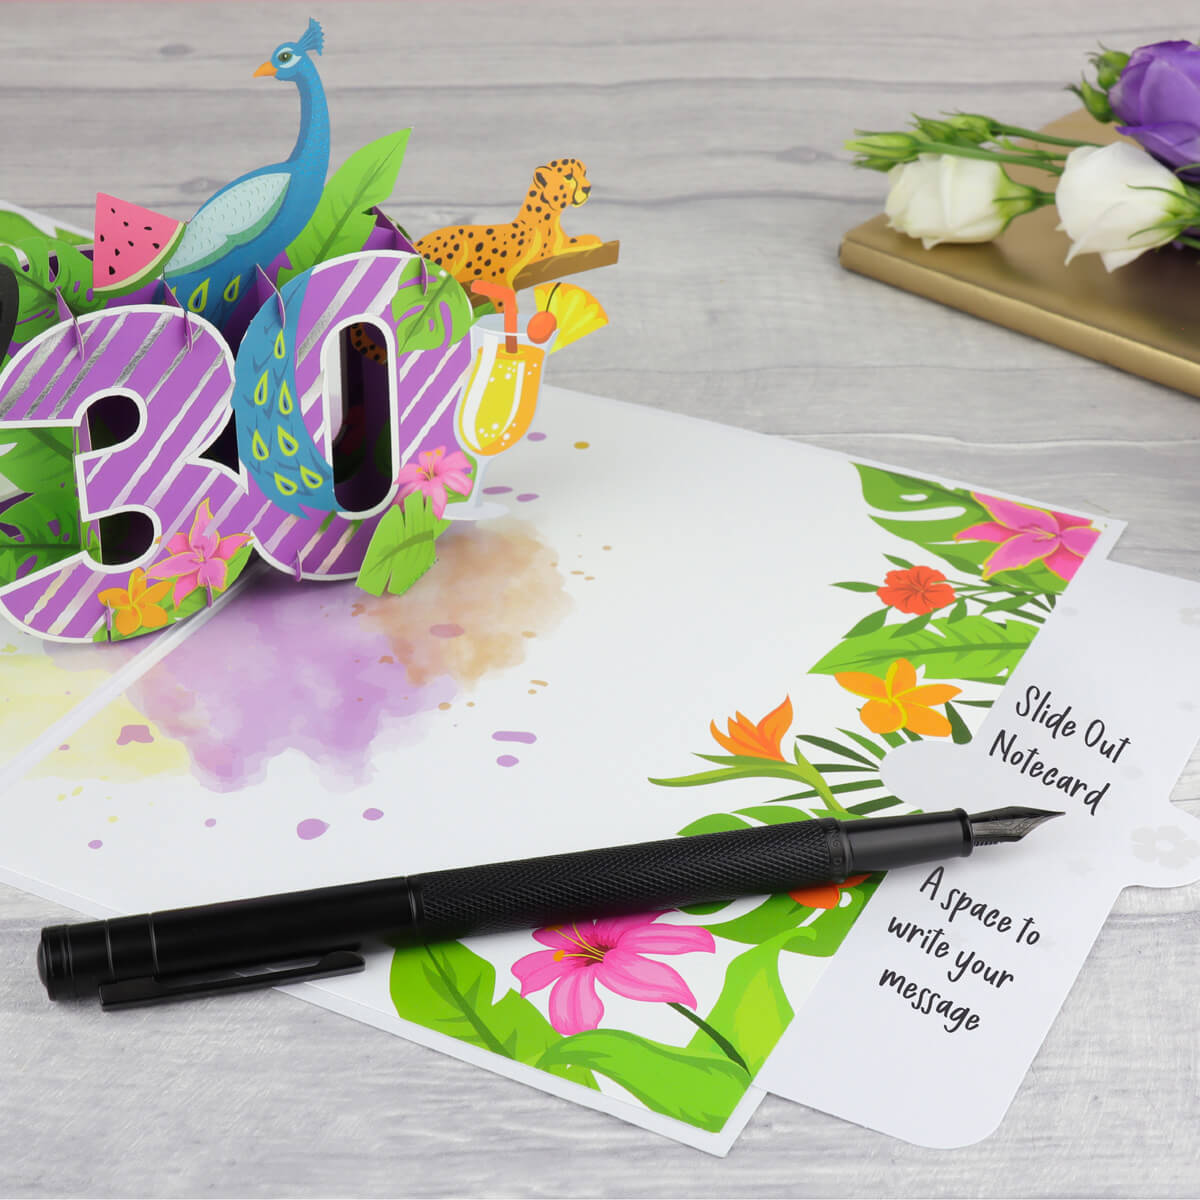 lifestyle image showing 30th birthday pop up card slide out notecard to write message on